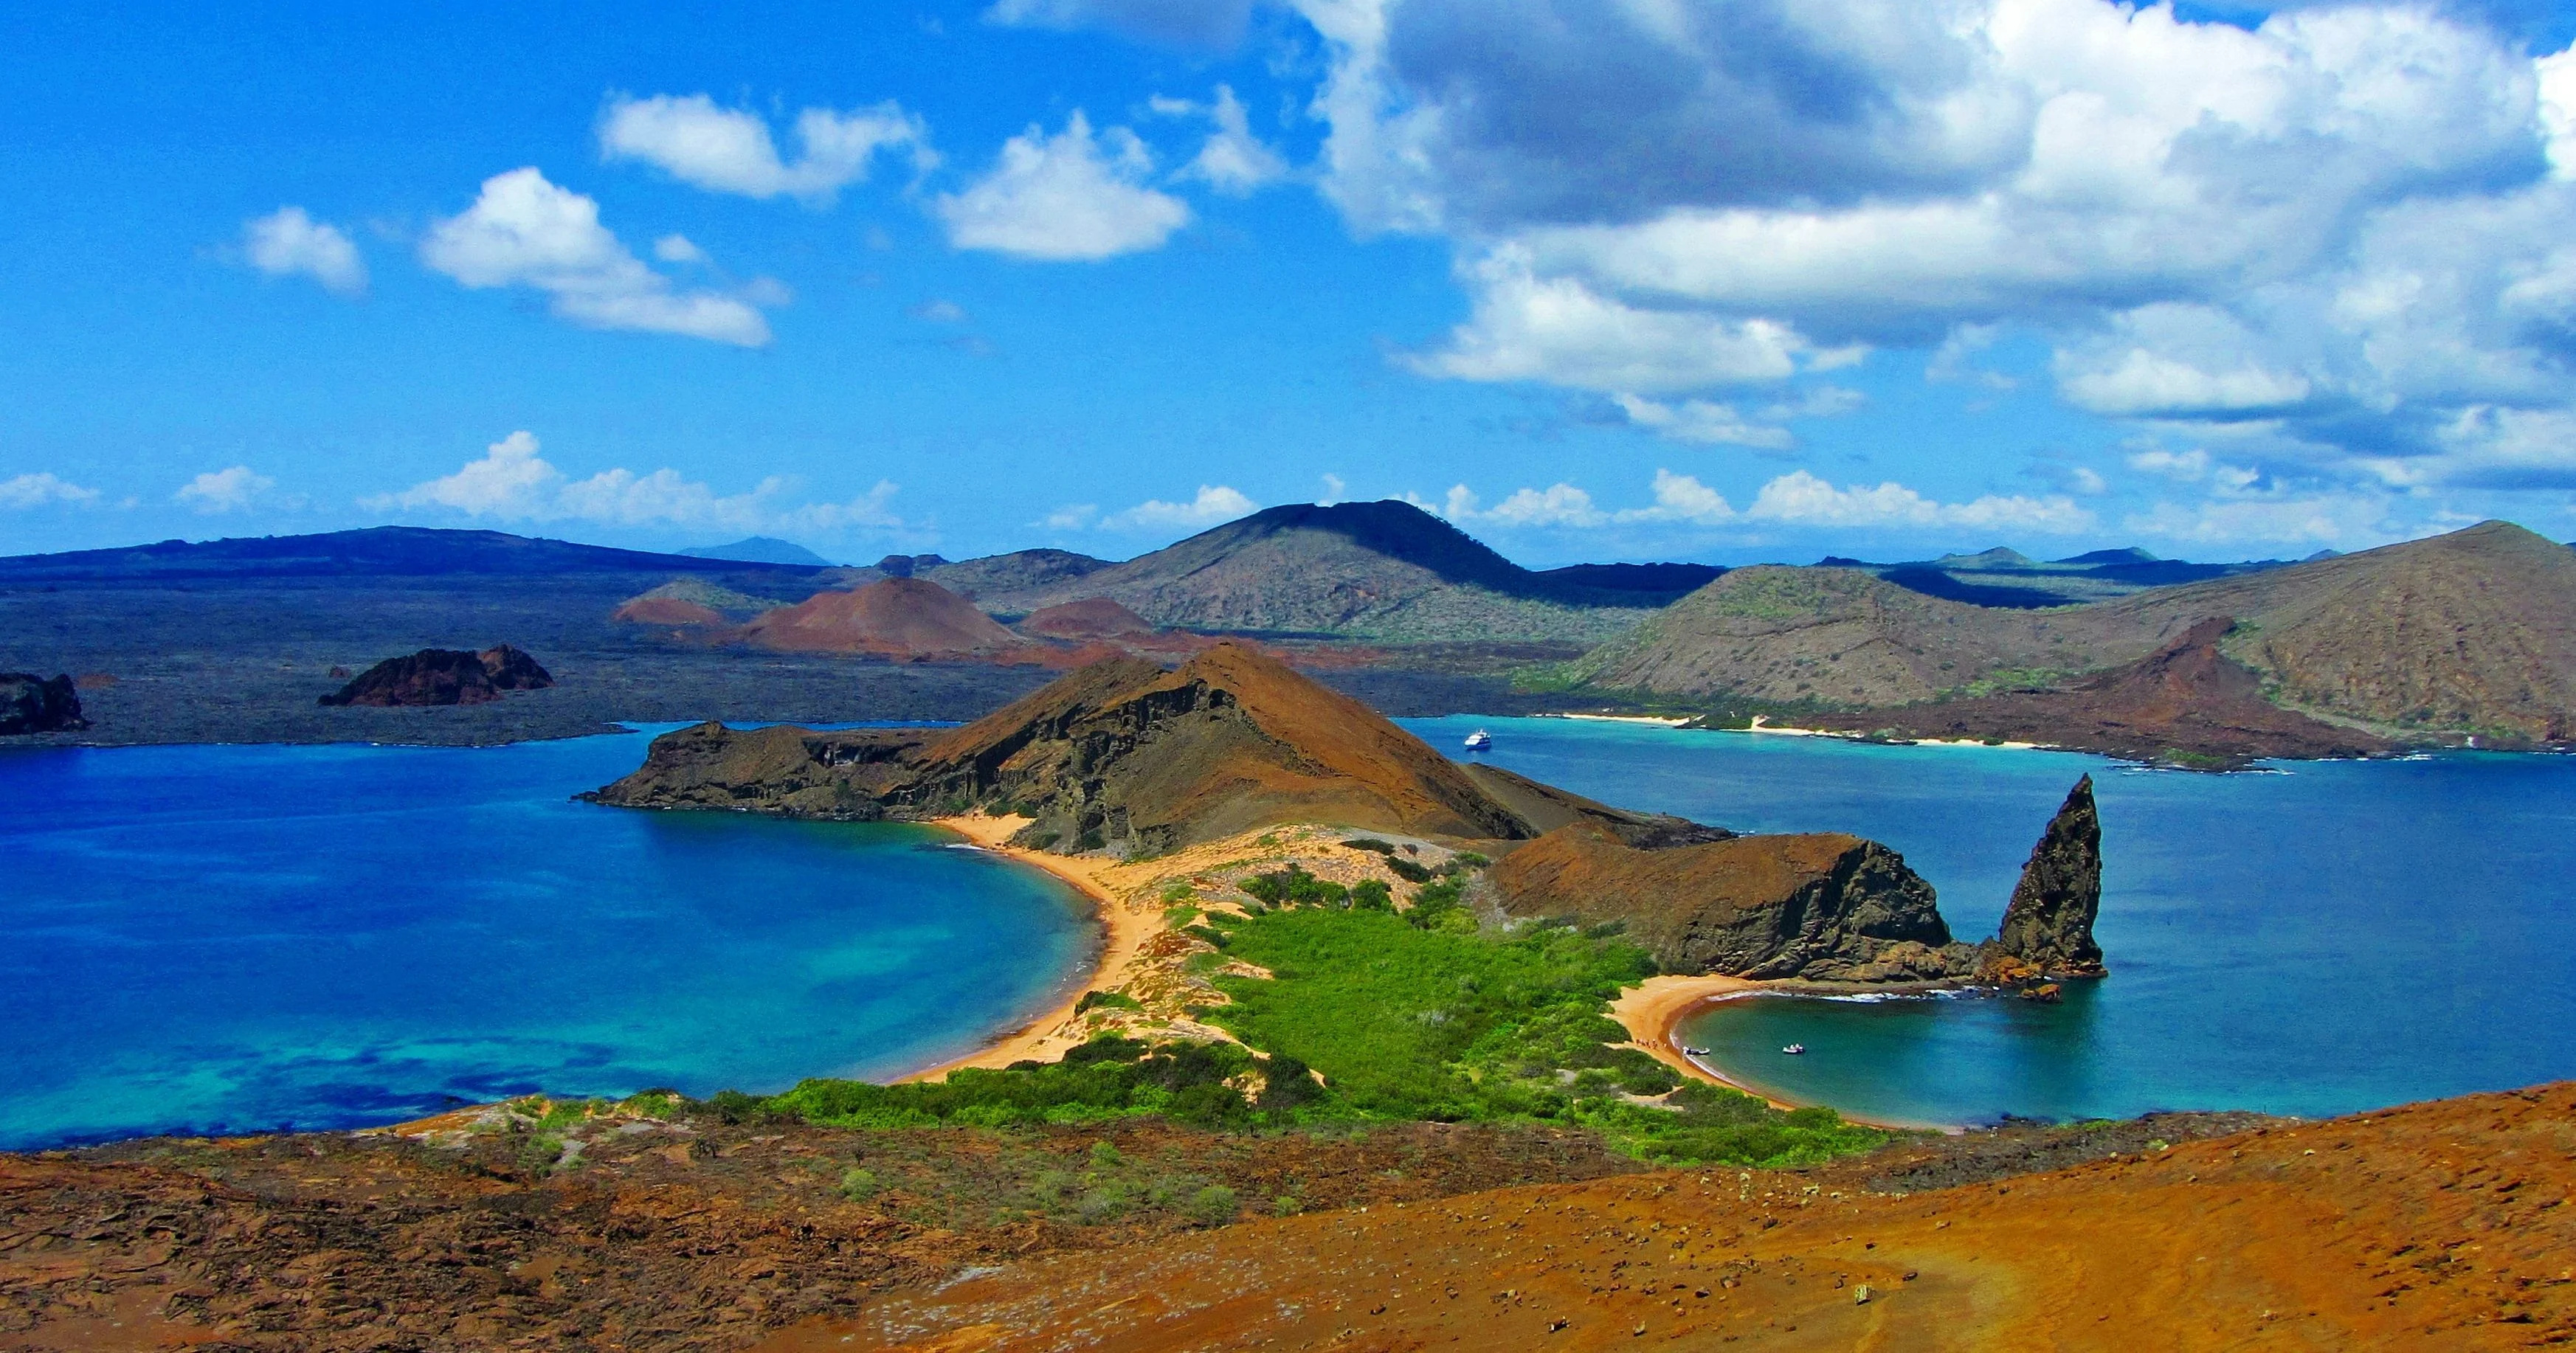 Ecuador: View from Bartolome Island, a volcanic islet in the Galapagos Islands group. 3500x1840 HD Wallpaper.